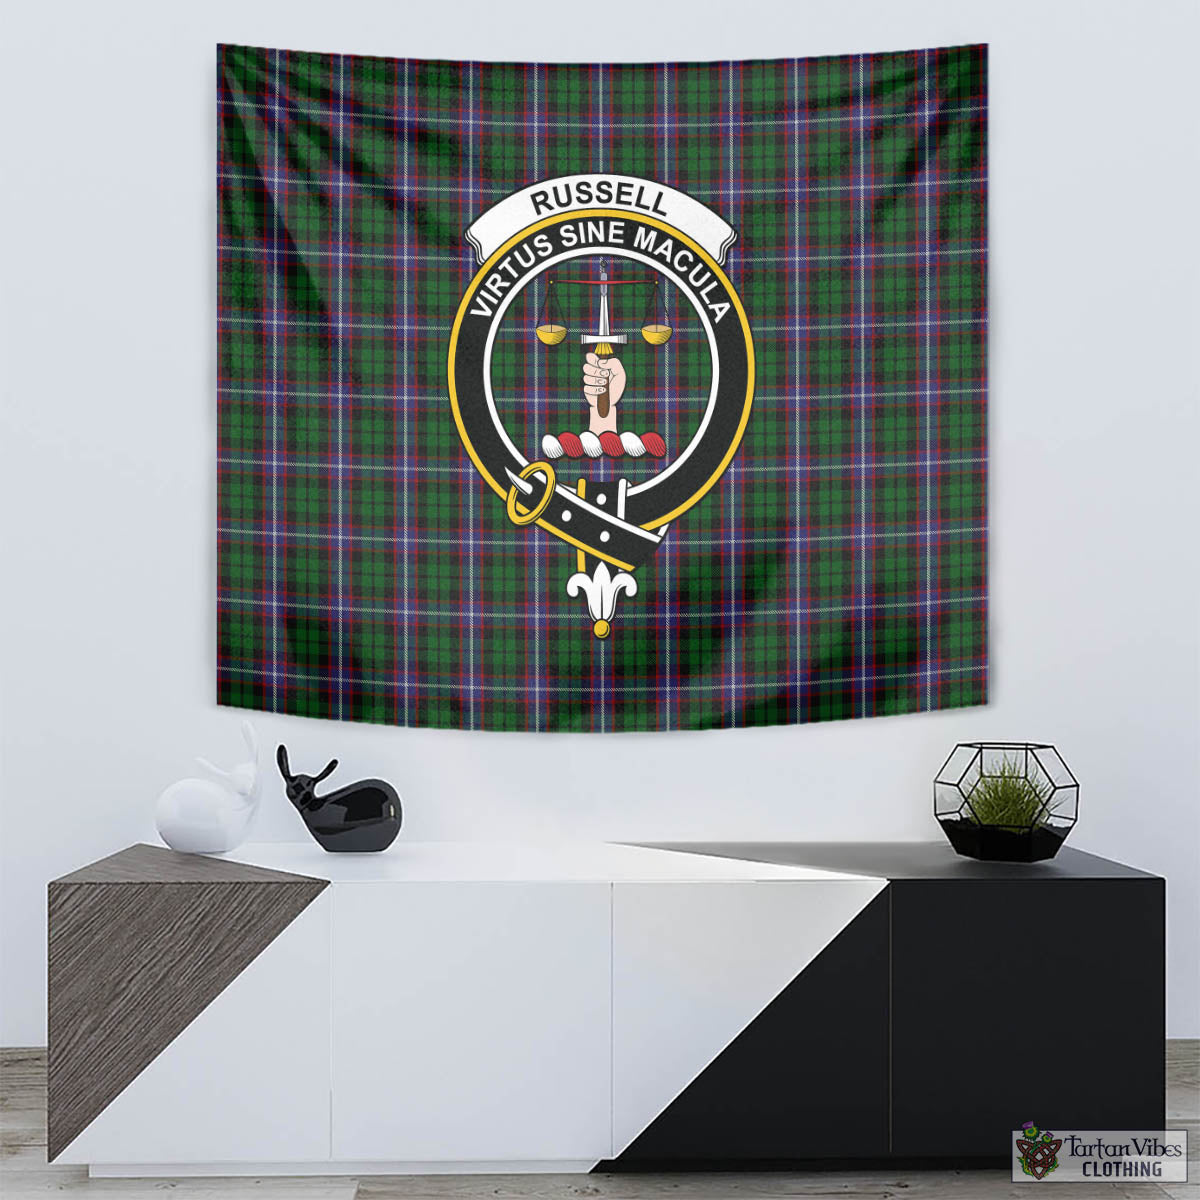 Tartan Vibes Clothing Russell Tartan Tapestry Wall Hanging and Home Decor for Room with Family Crest